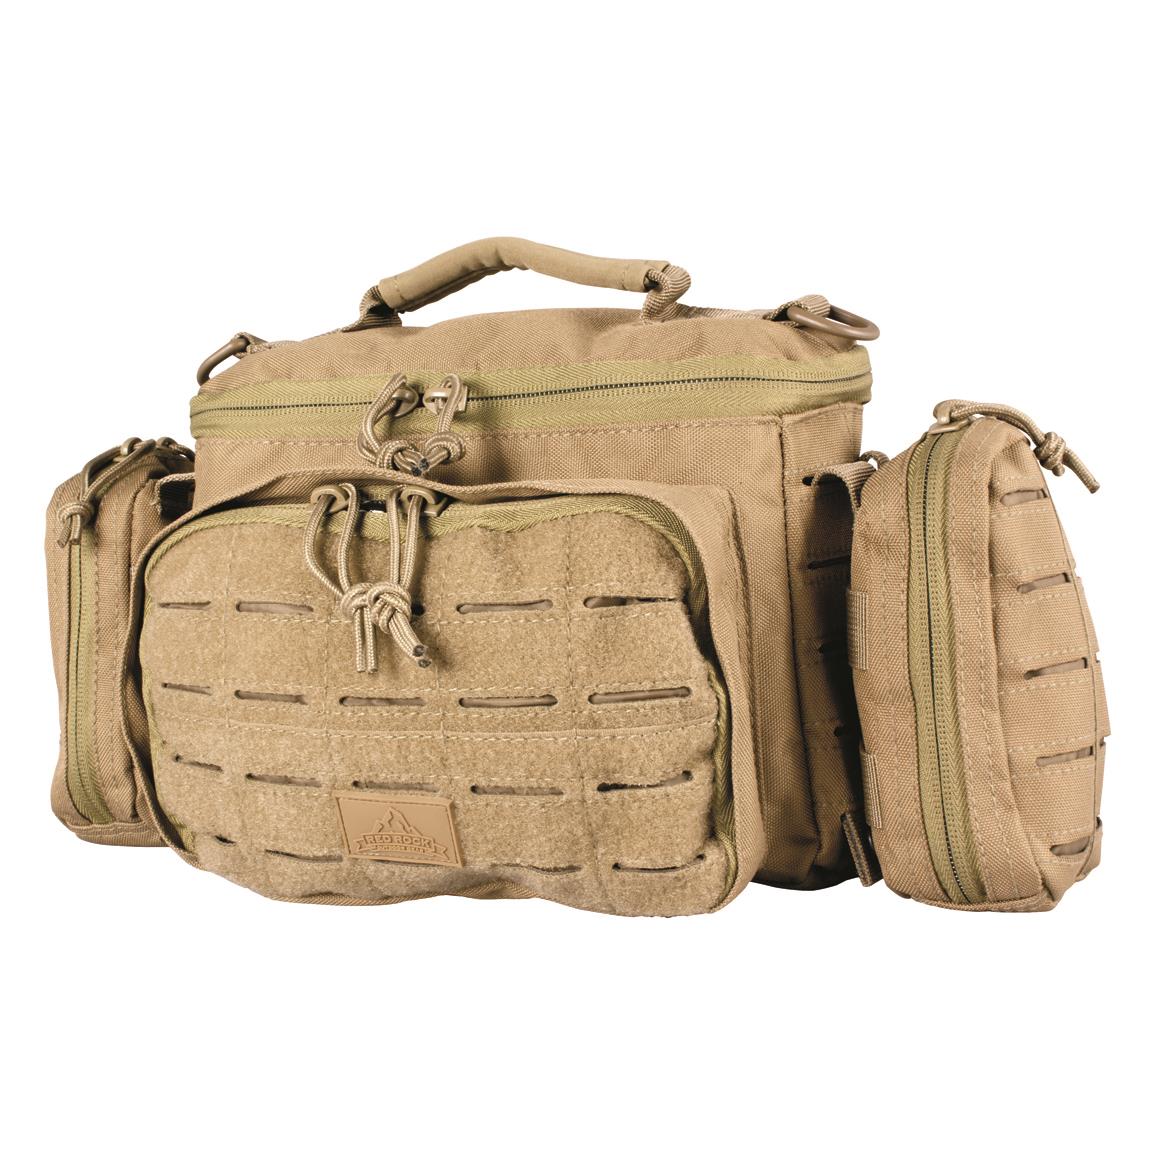 MOLLE attachment points, Coyote